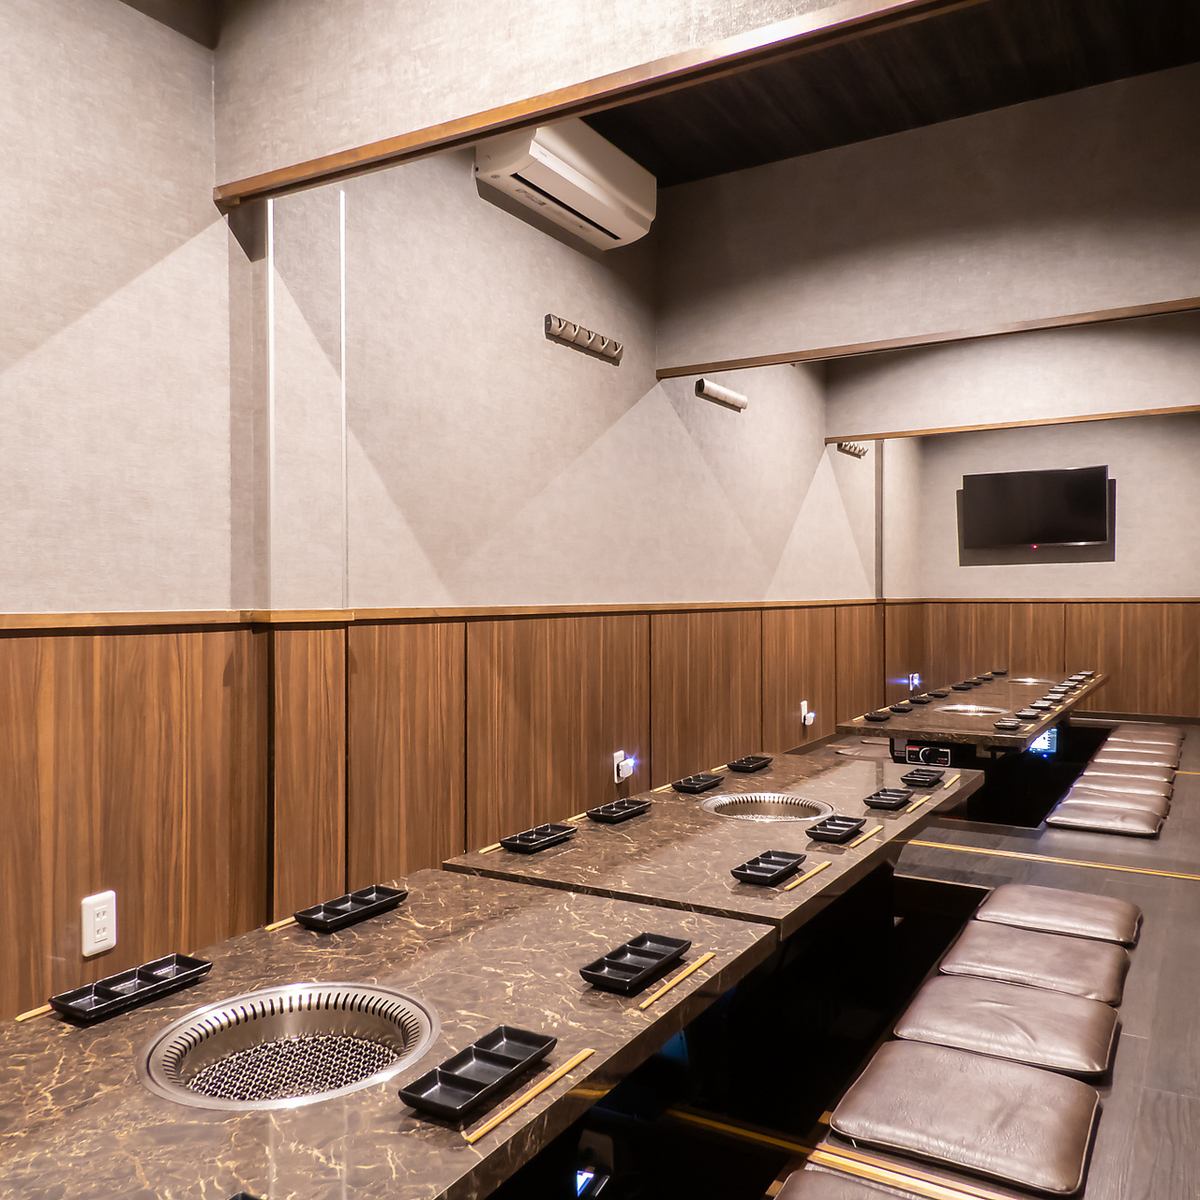 We also have private rooms that can accommodate up to 32 people.The walls are thick and perfect for a yakiniku banquet.